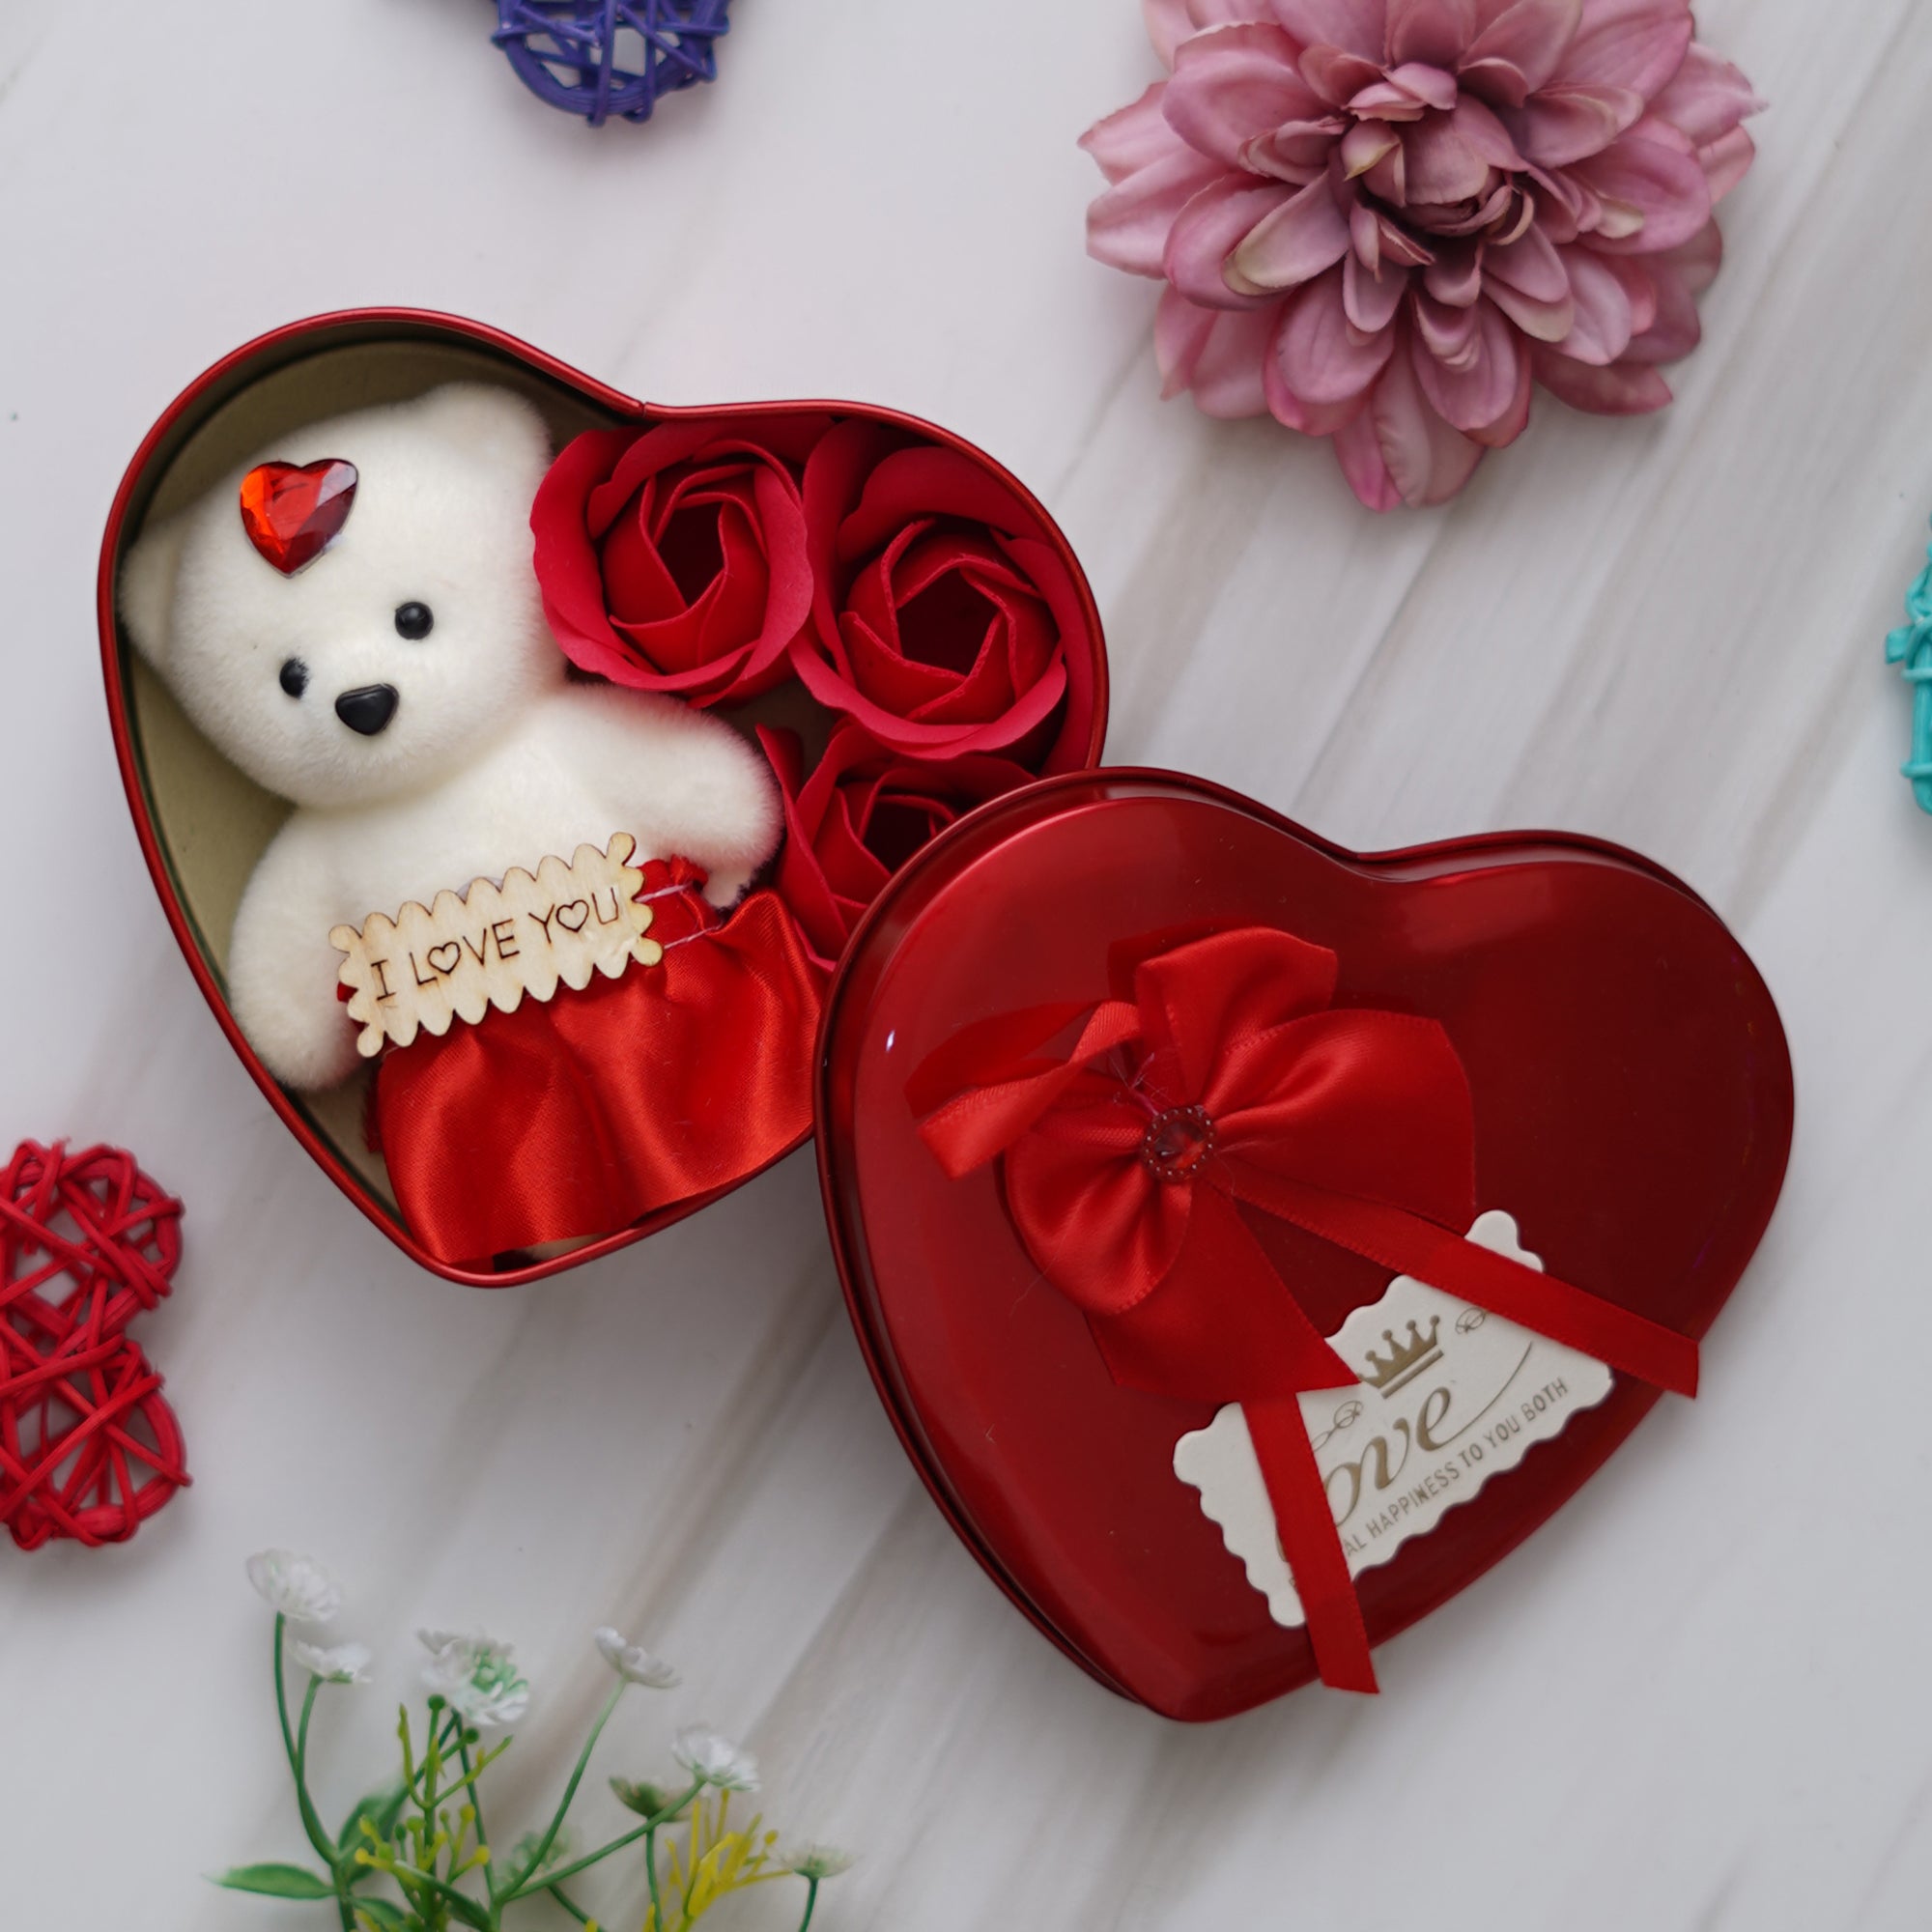 Valentine Combo of Card, Heart Shaped Gift Box Set with White Teddy and Red Roses, "20 Reasons Why I Need You" Printed on Little Hearts Wooden Gift Set 3